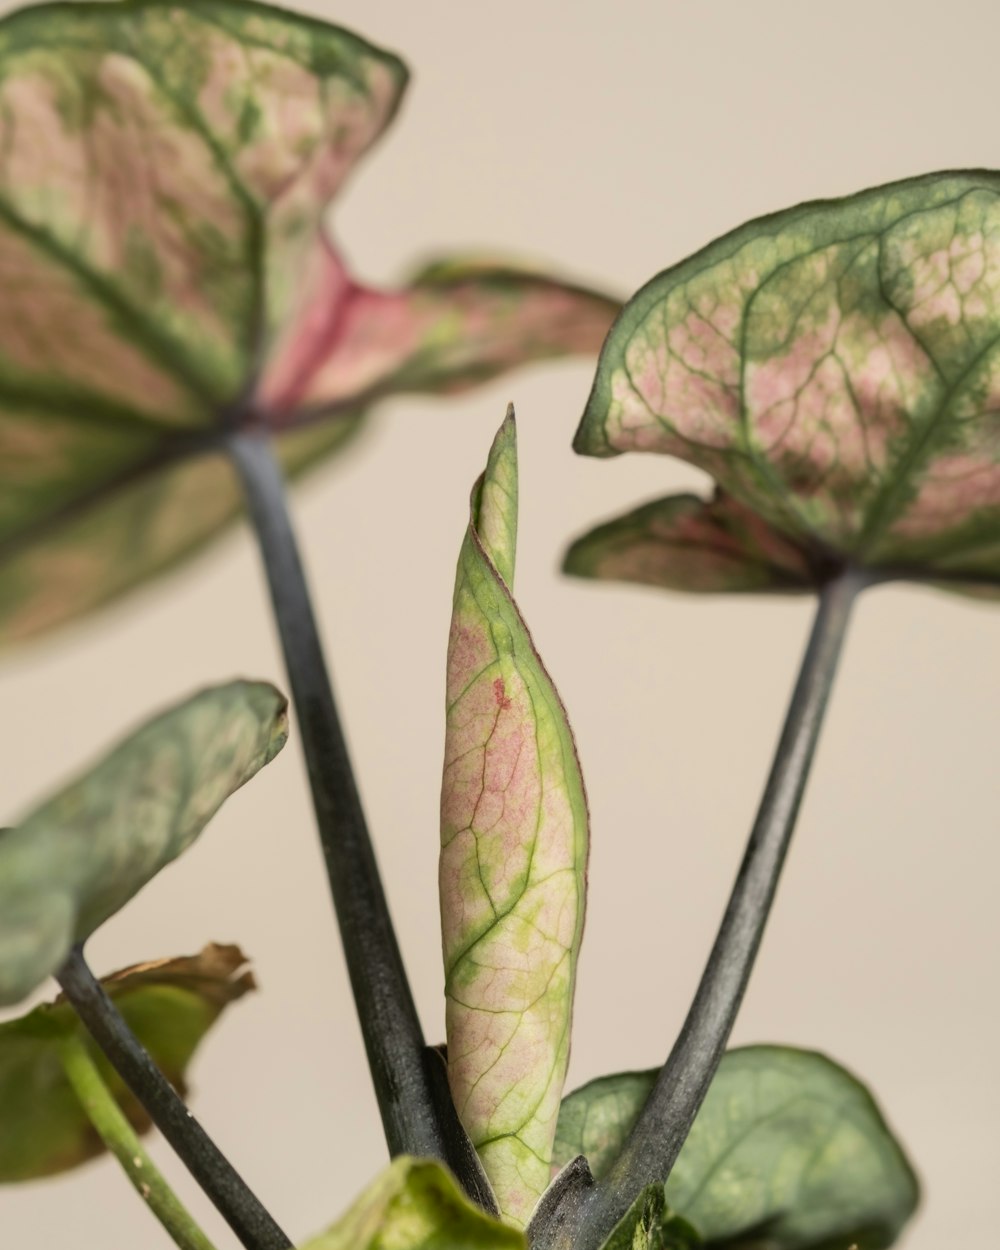 a close up of a plant with pink and green leaves